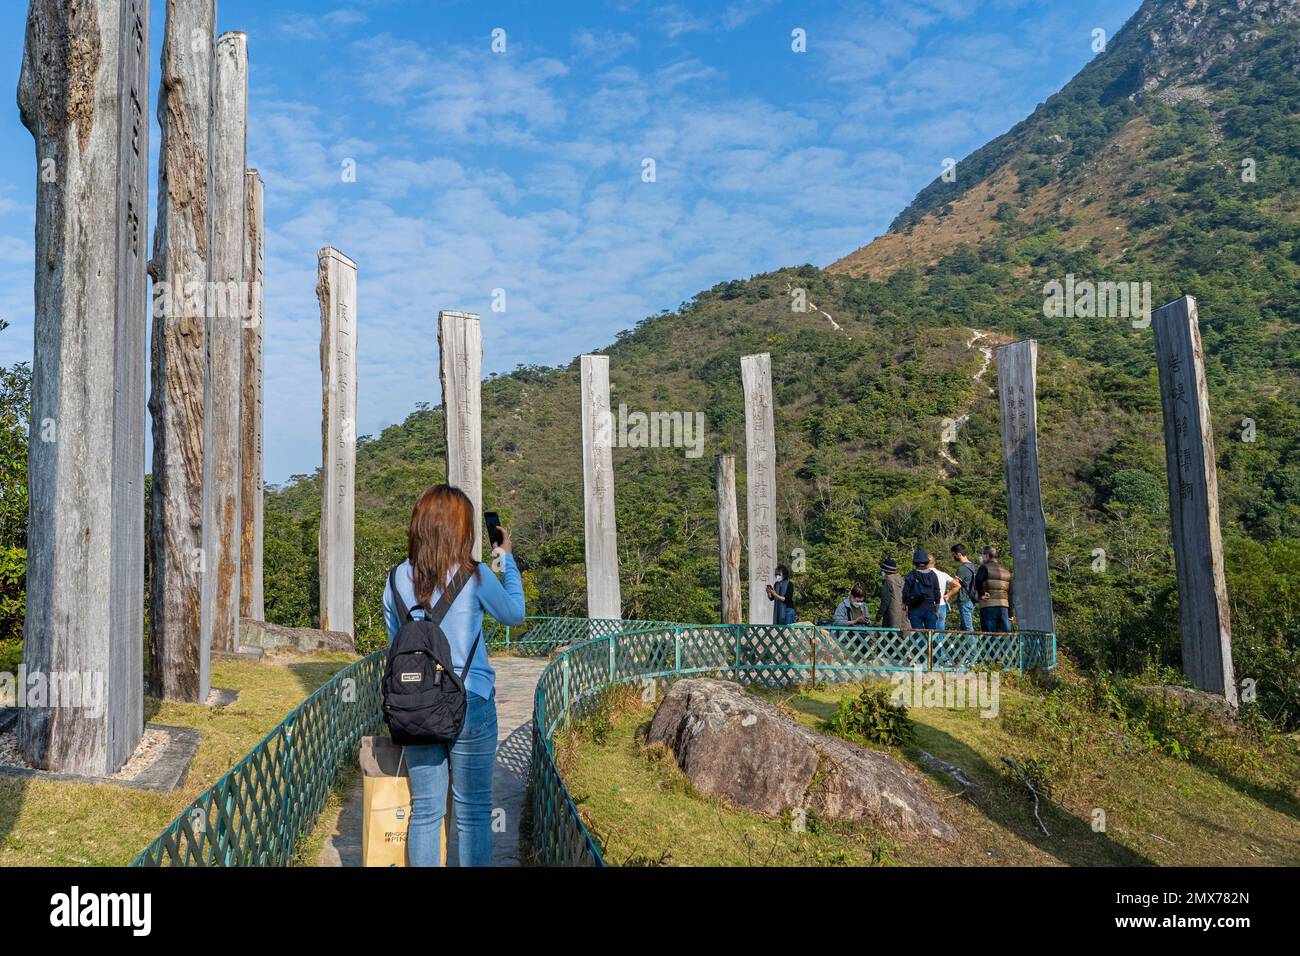 Hong Kong, Lantau Island - The Wisdom Path is a monument  of 38 wooden columns on which verses from the centuries-old Heart Sutra have been carved Stock Photo